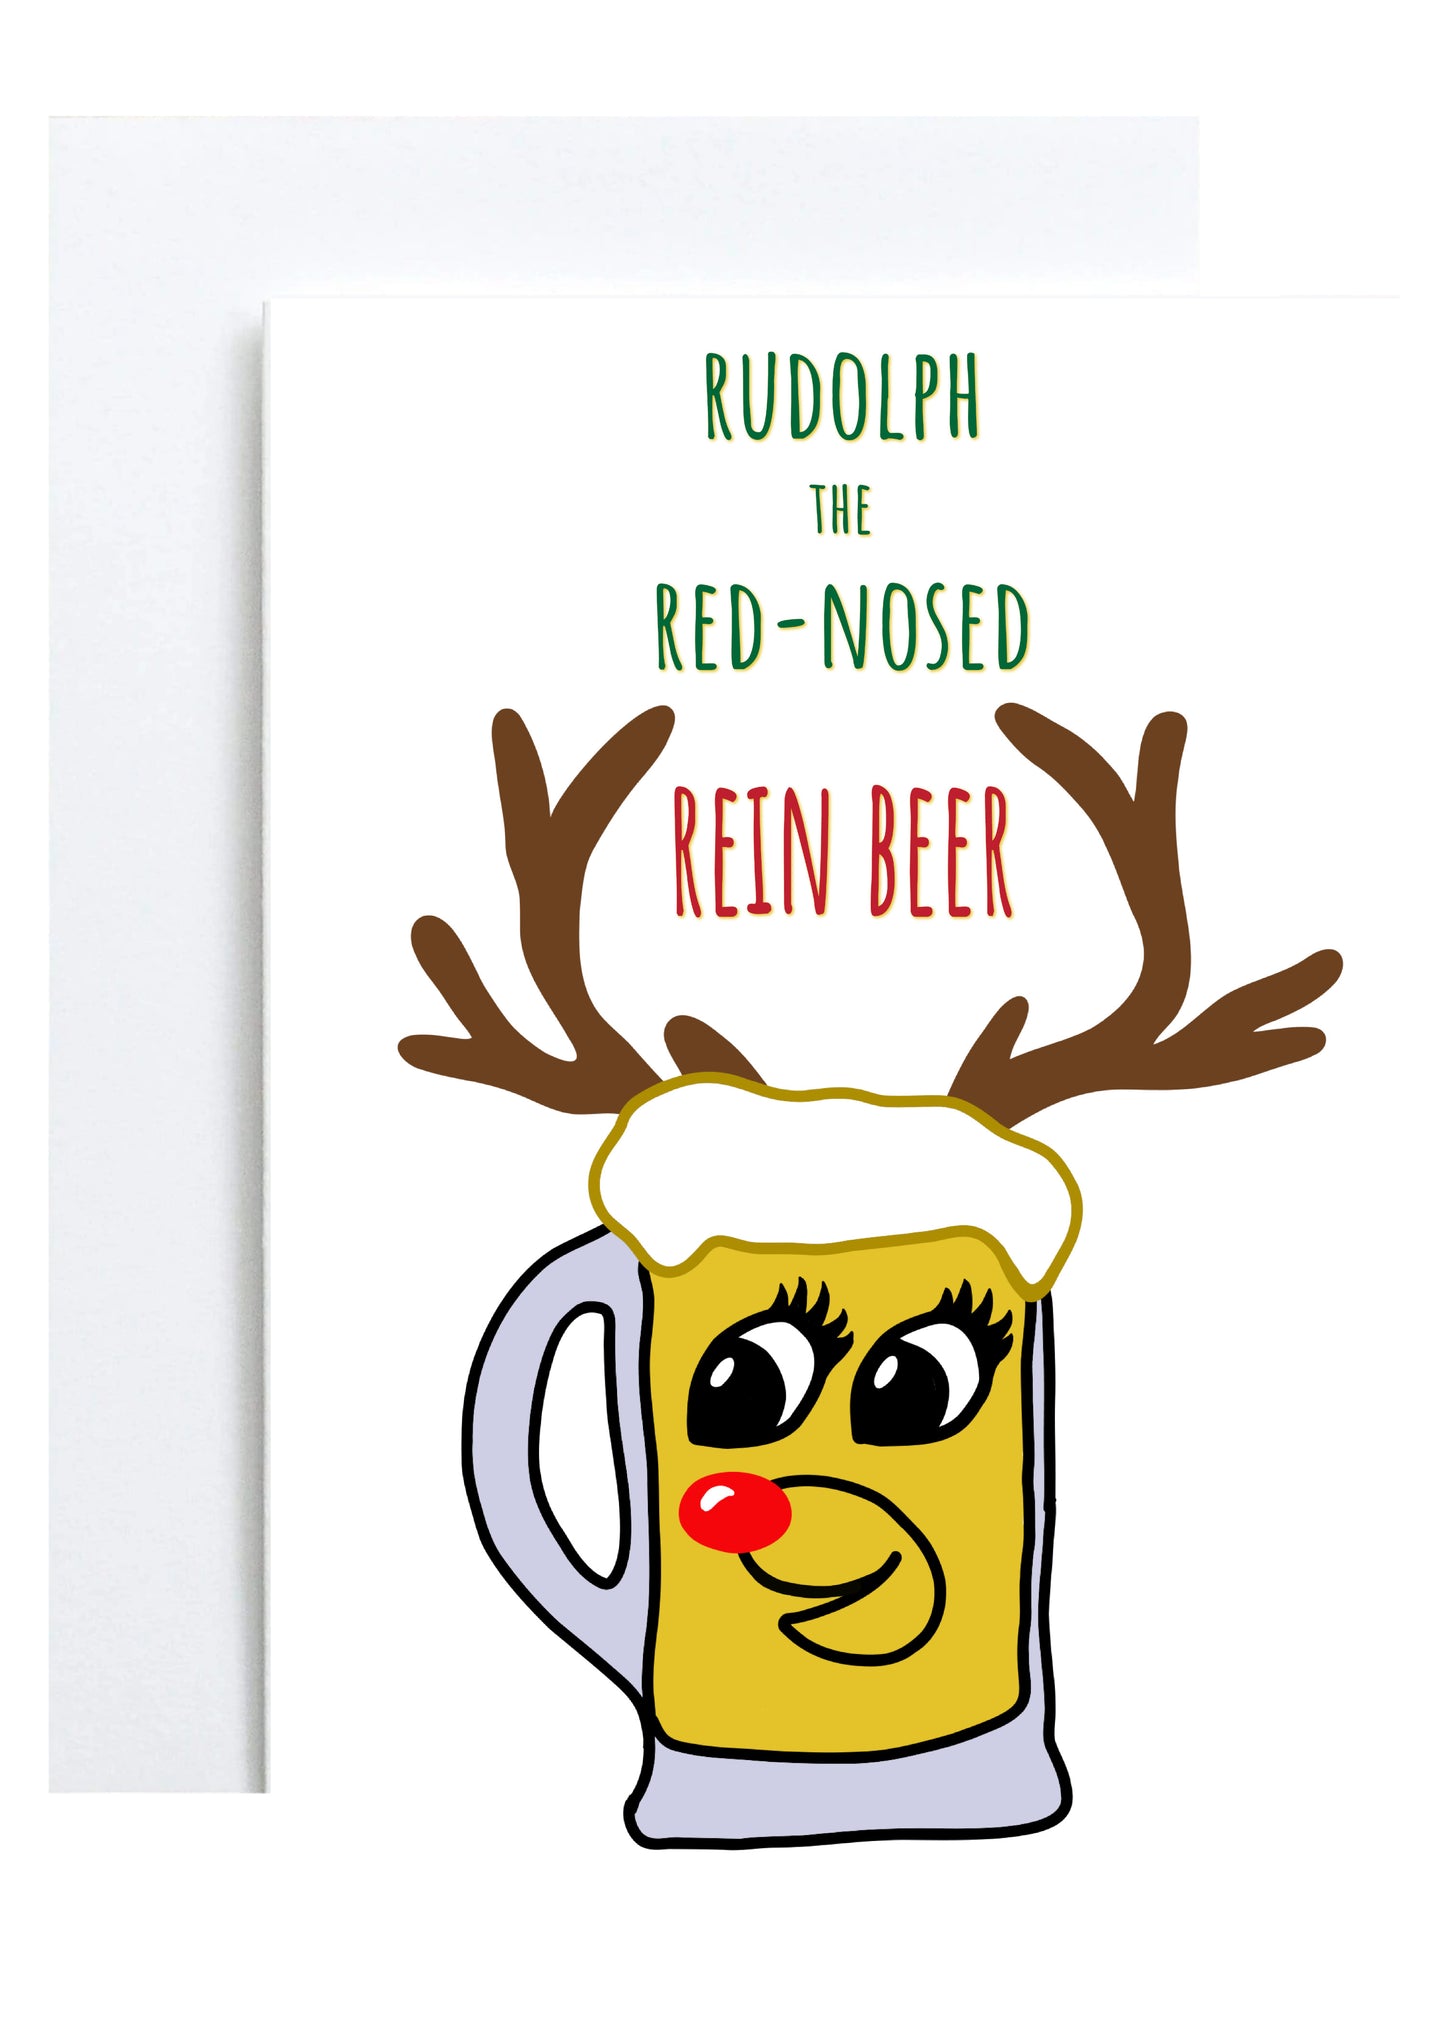 "Rudolph the Red-Nosed Rein Beer" Greeting Card (Christmas)